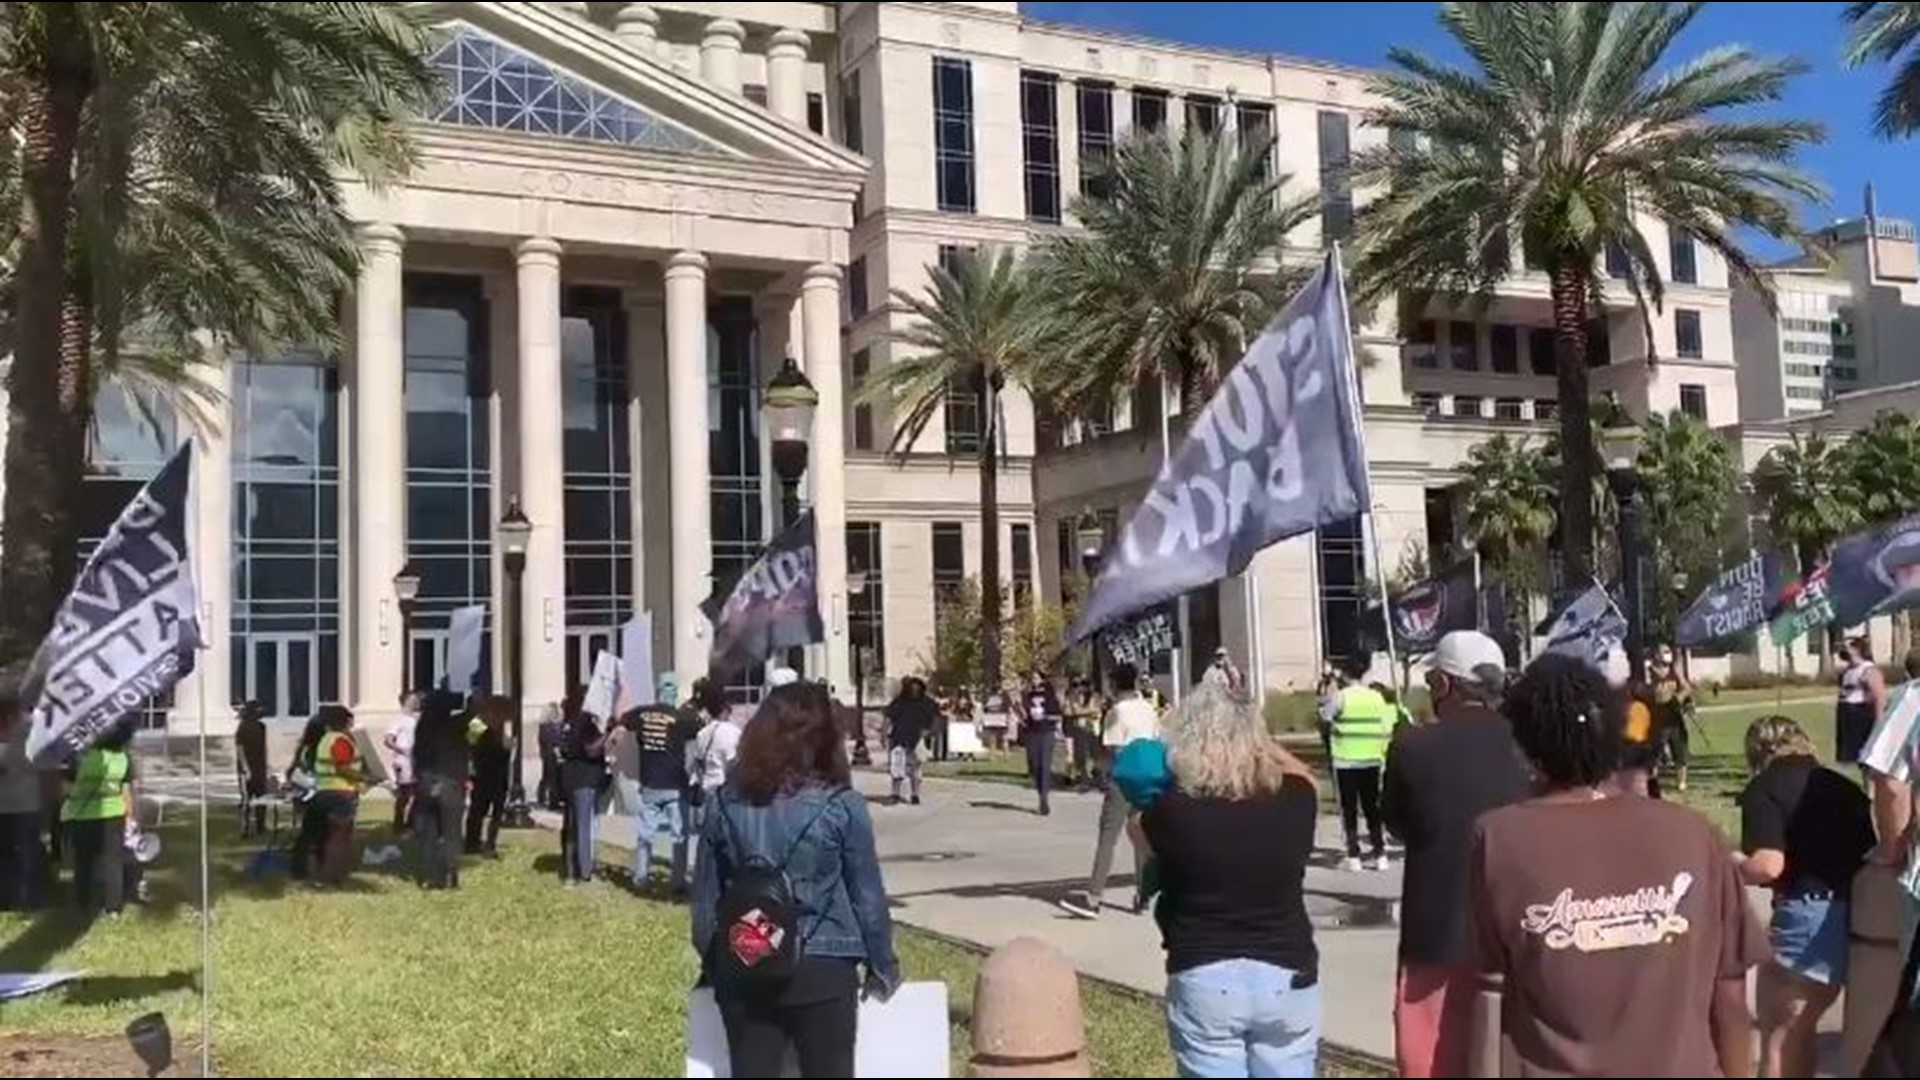 Activists are gathering in front of the Duval County courthouse to rally against Florida Gov. Ron DeSantis' new proposed "anti-mob" legislation.